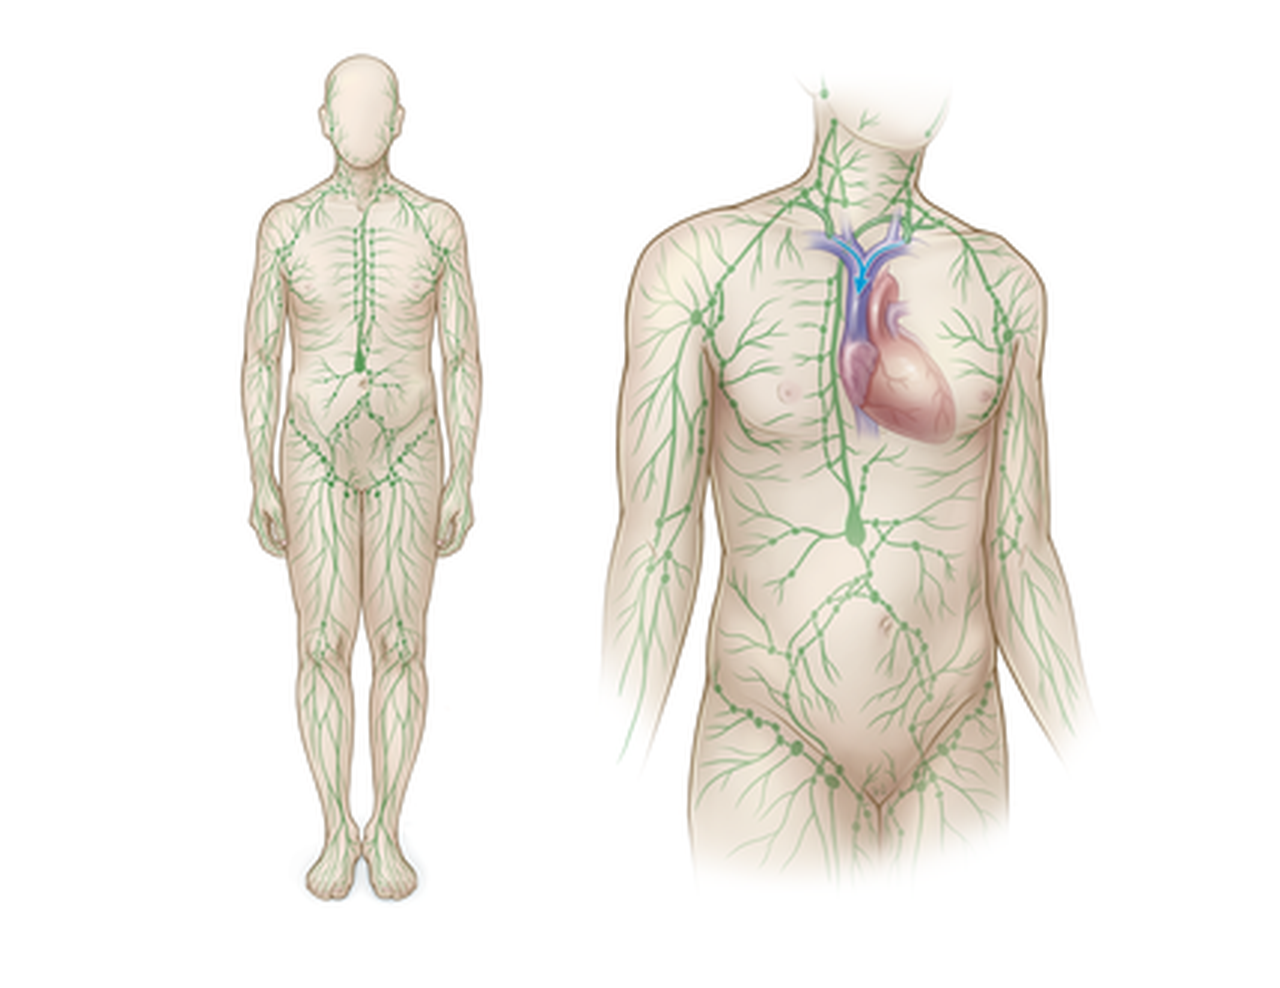 ILLU_Med_Lymphatic-system-overview_SIGVARIS_GROUP.png